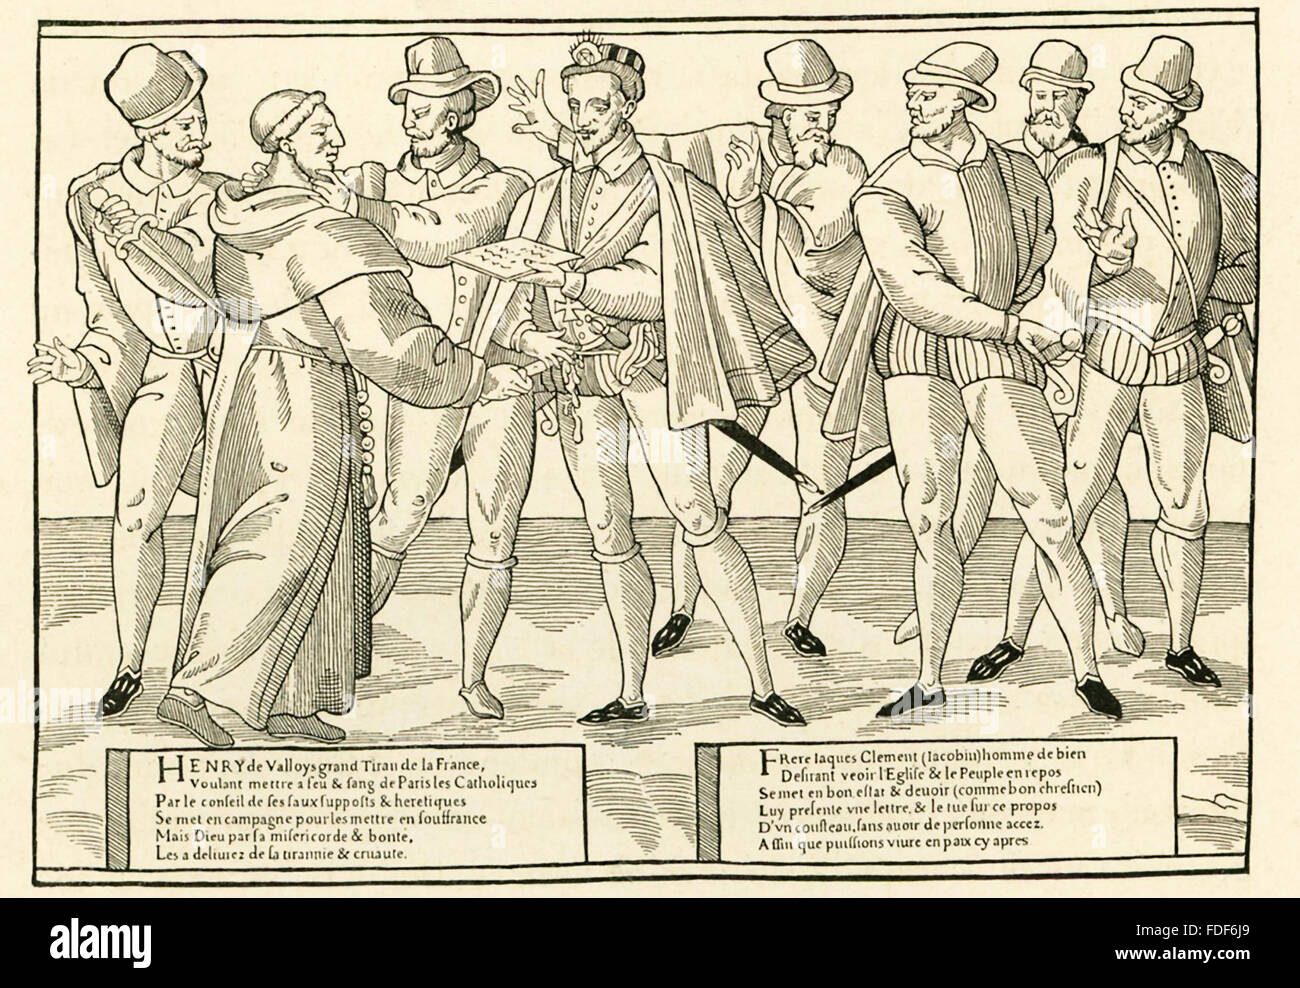 Henri III ruled France from 1574 until his death 1589, and he was the last in the Valois dynasty. A Dominican friar named Jacques Clement, who was seen as a religious fanatic, assassinated Henri. Henri of Navarre succeeded him. This illustration shows Henri III accepting from Clement what was supposed to be a secret message. As Clement hands the message over, he thrusts his knife into Henri's stomach. Henri's attendants kill Clement immediately. This print is from Rec. de l'Histoire de France 1589-1590. Stock Photo